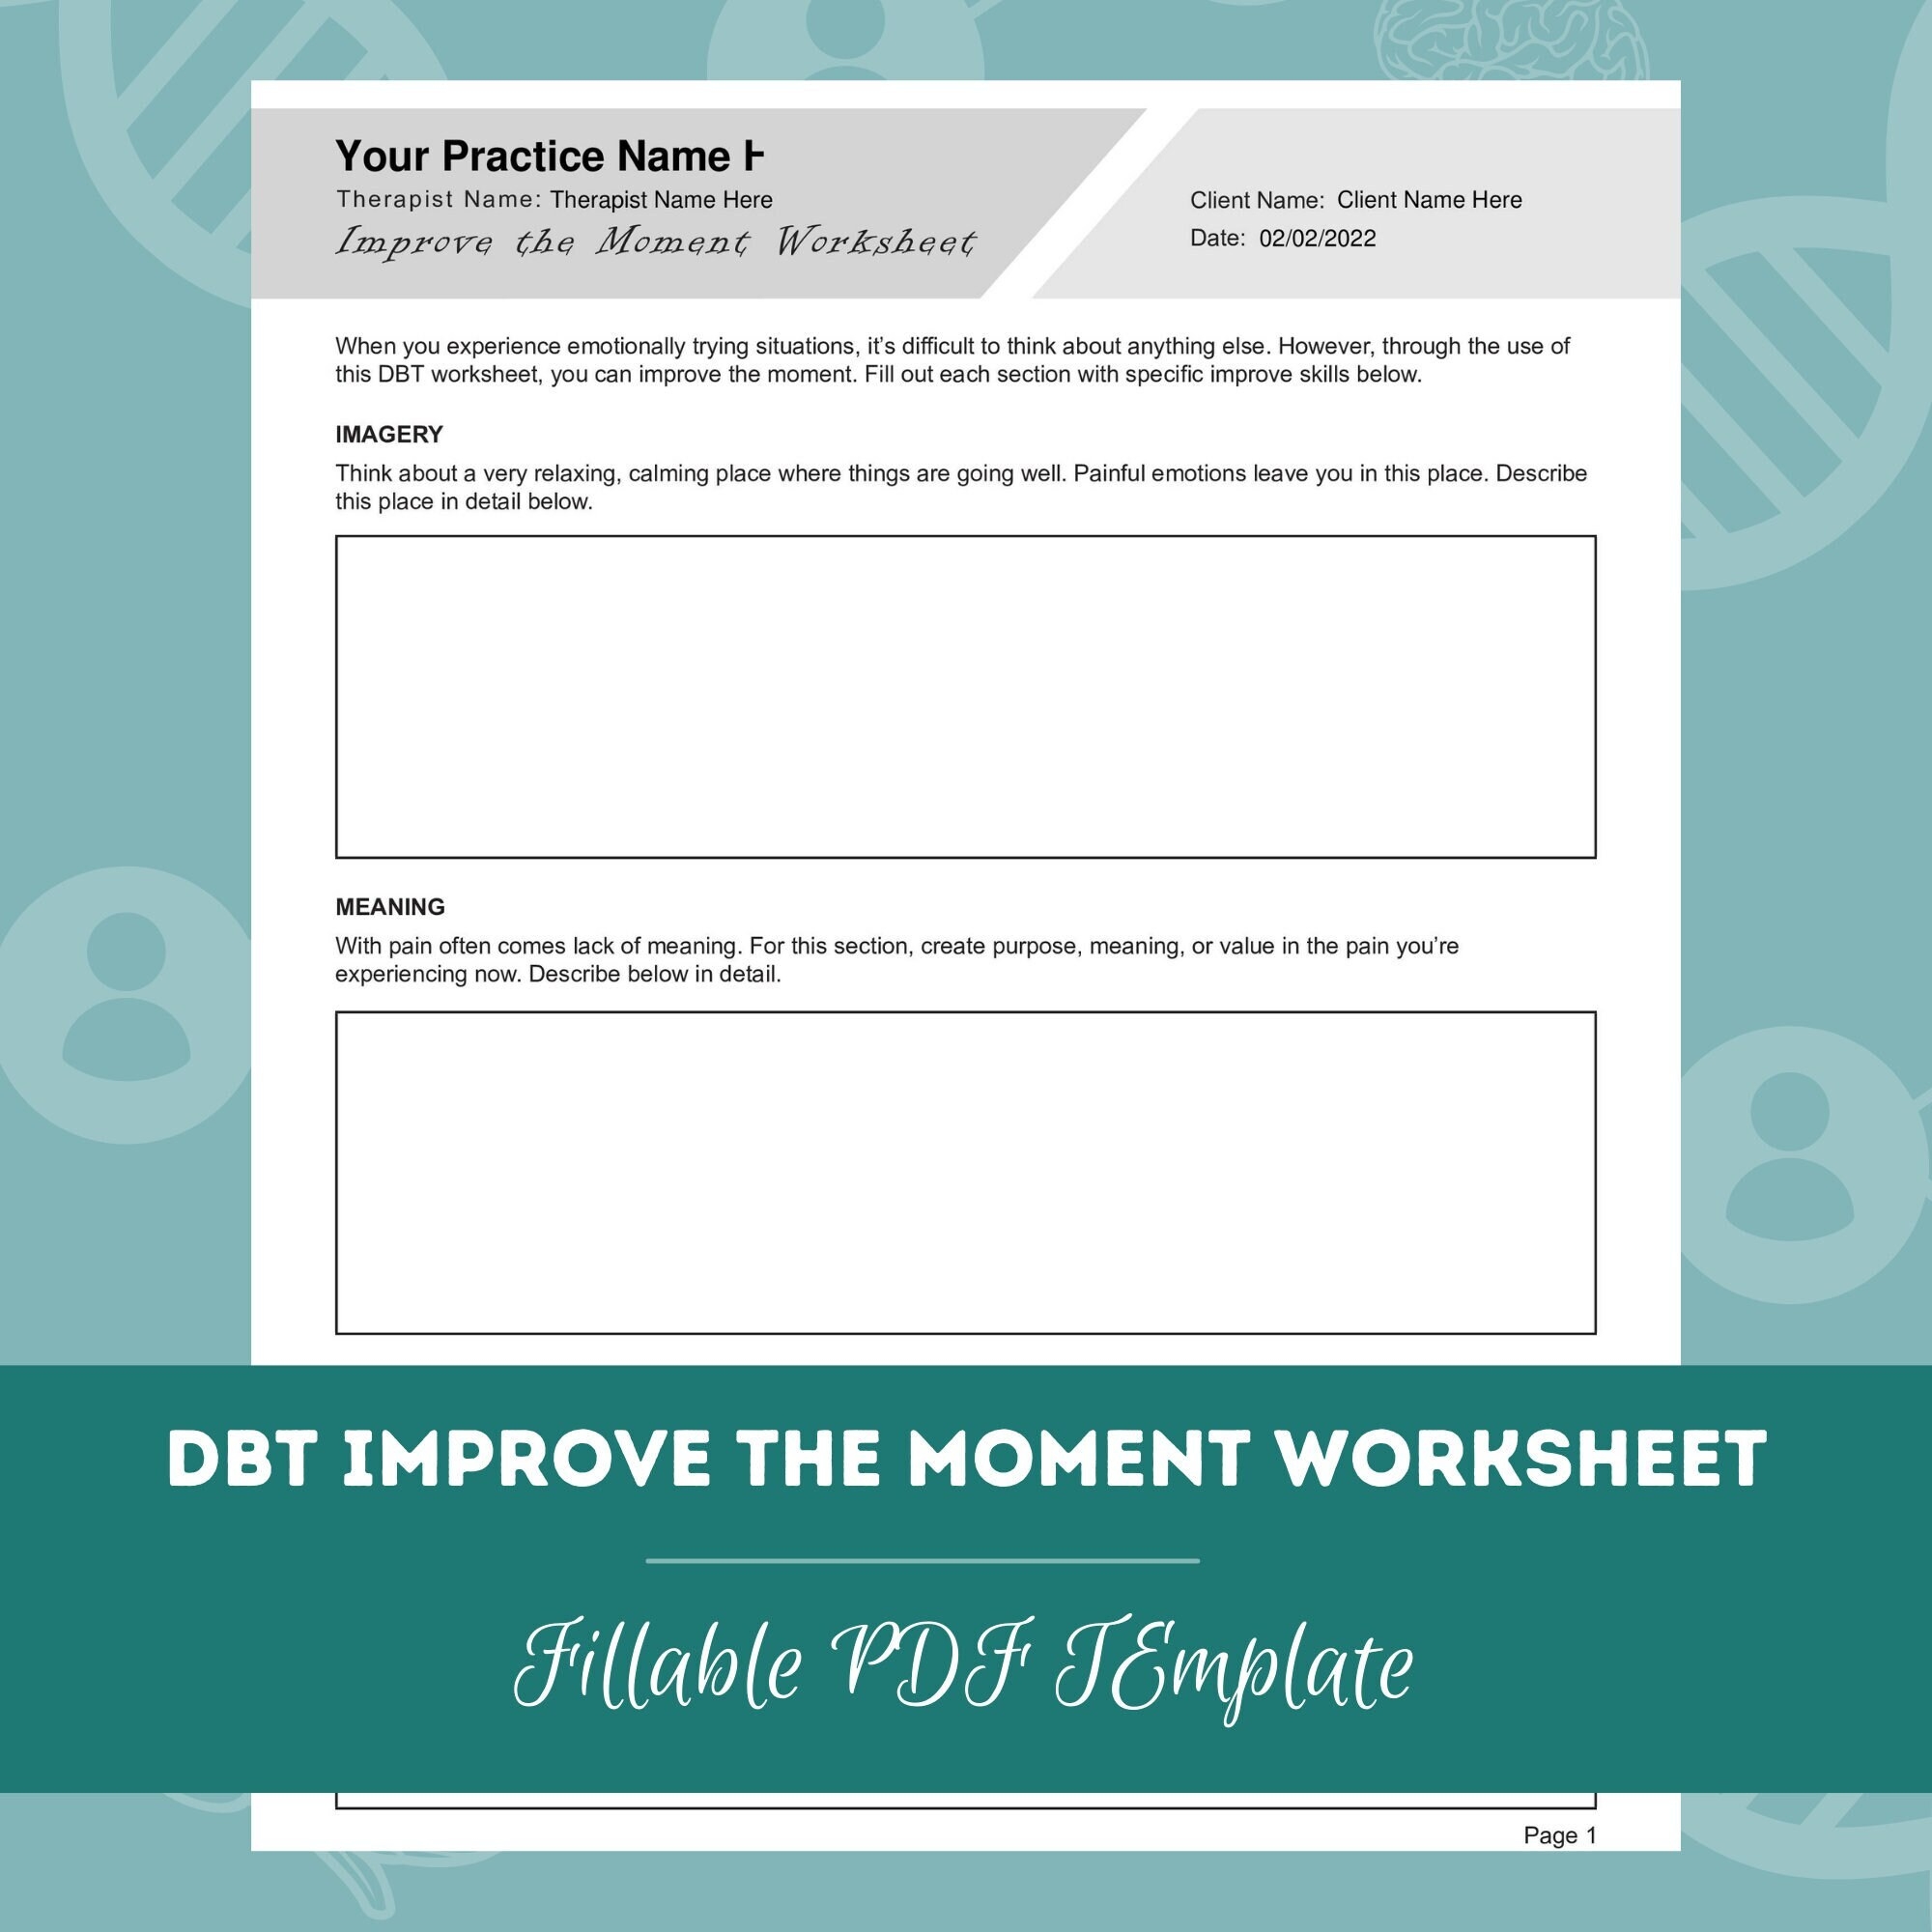 DBT Improve The Moment Worksheet Editable Fillable PDF Template For Counselors Psychologists Social Workers Therapists Etsy